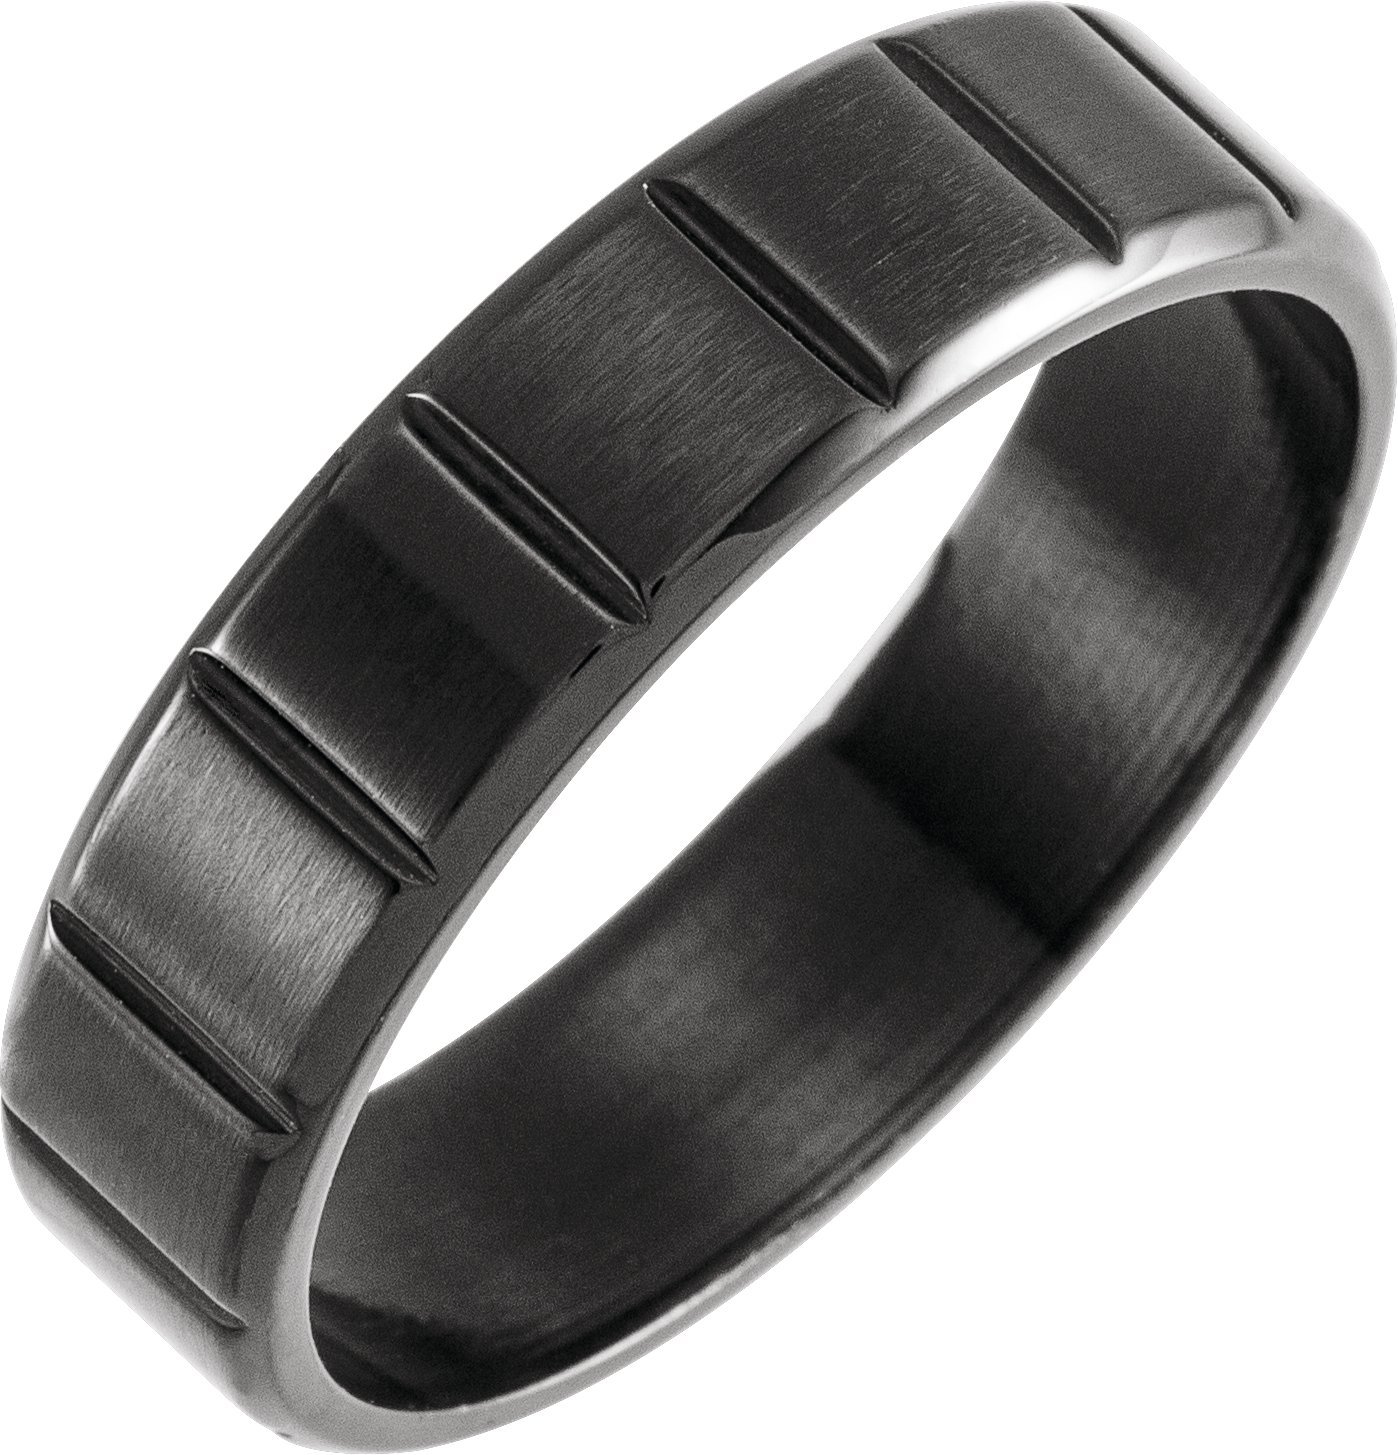 Black PVD Titanium 6 mm Grooved Band Size 13 Ref 16653736